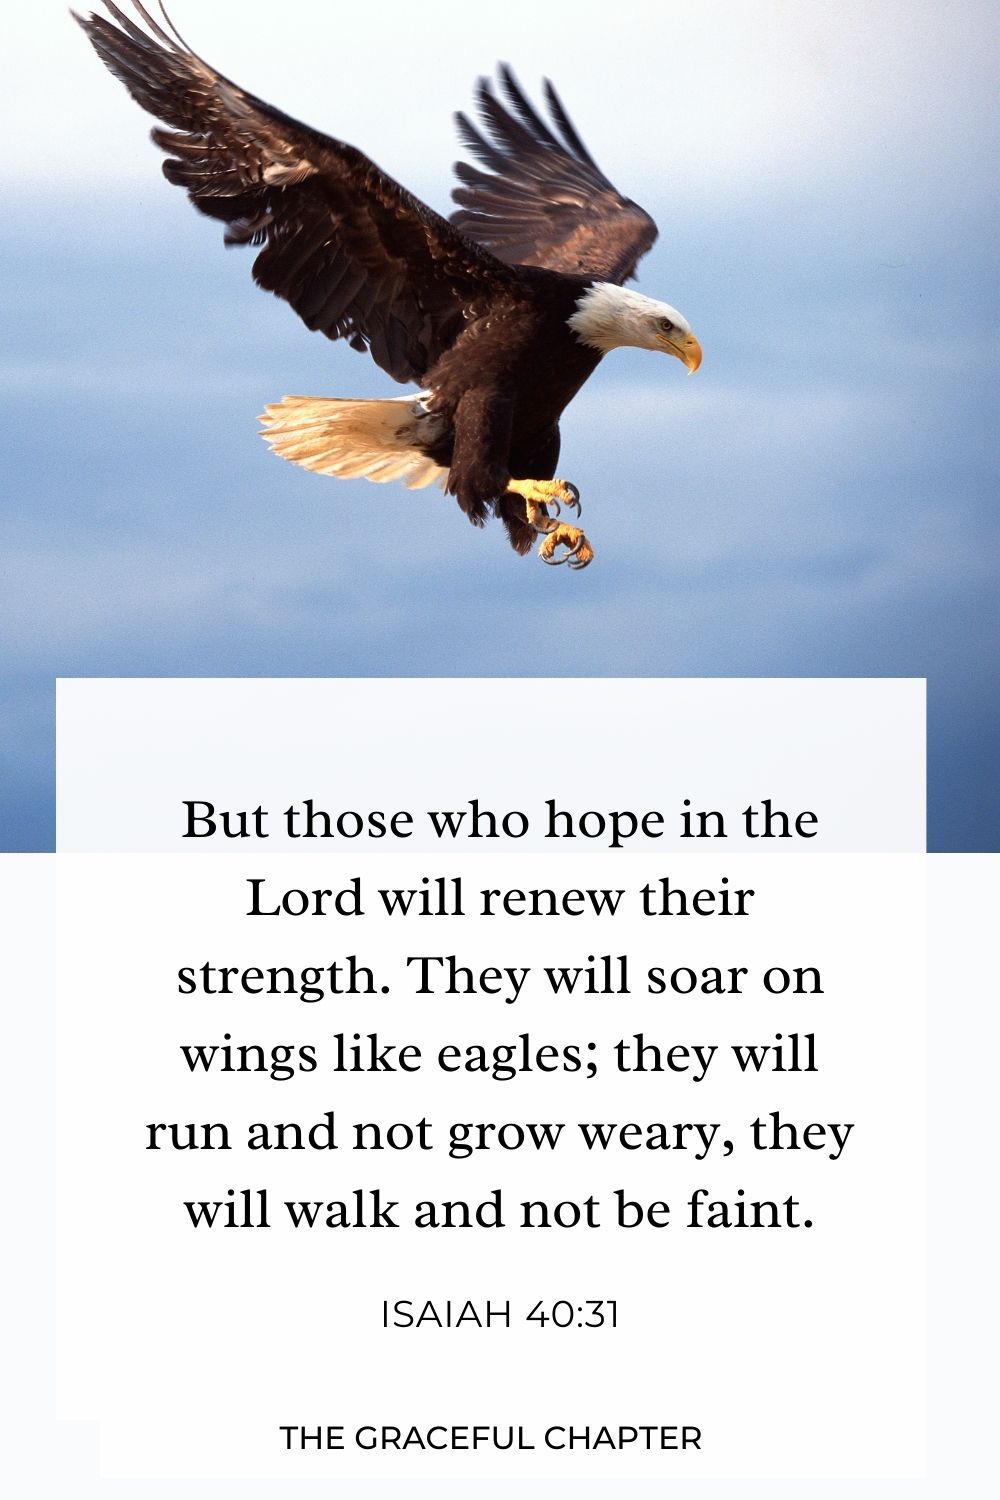 But those who hope in the Lord will renew their strength. They will soar on wings like eagles;  they will run and not grow weary,  they will walk and not be faint. Isaiah 40:31